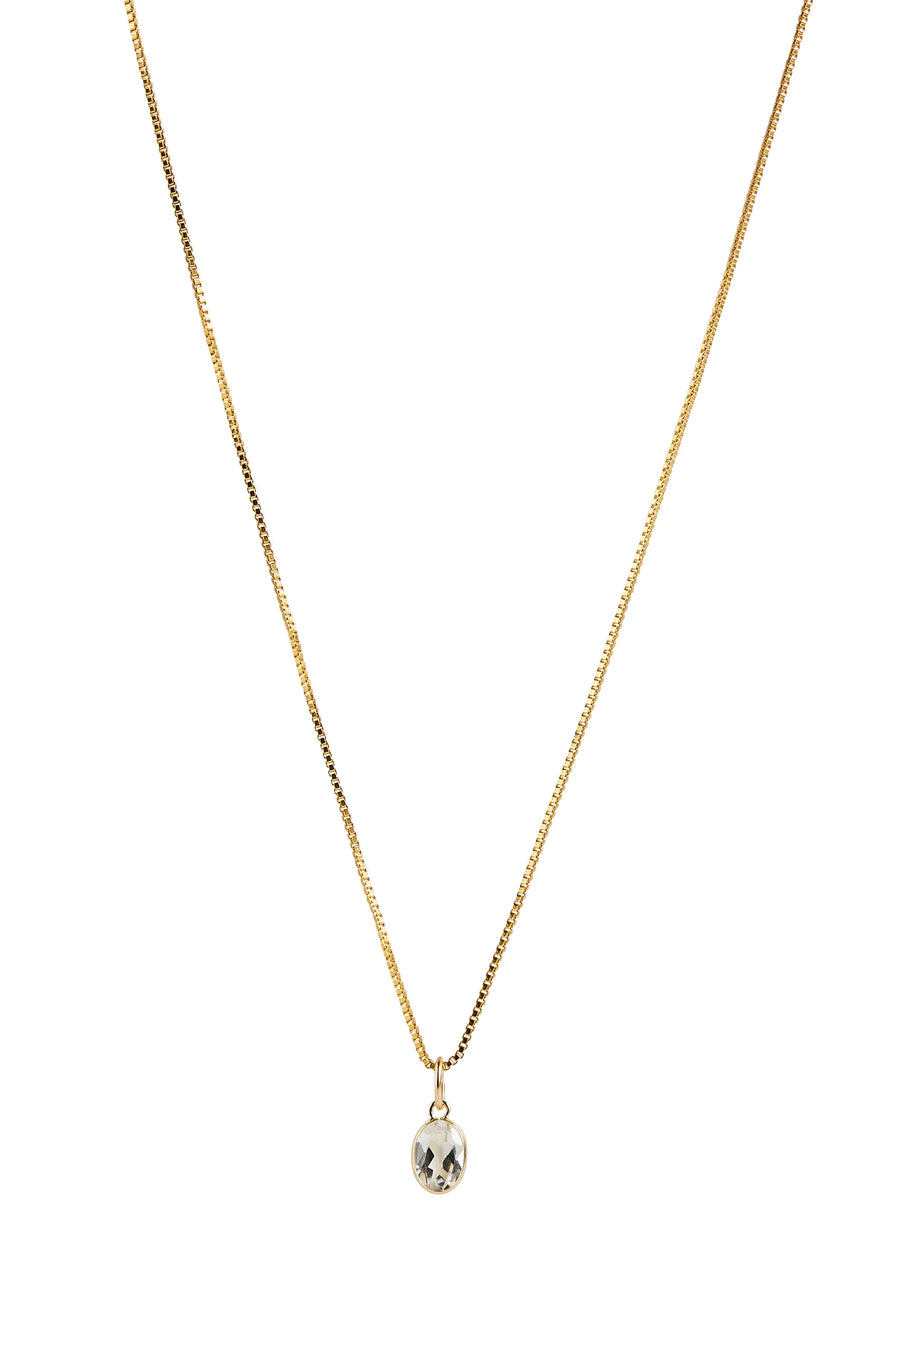 LISBETH JEWELRY - ALLO NECKLACE - 14K GOLD FILLED